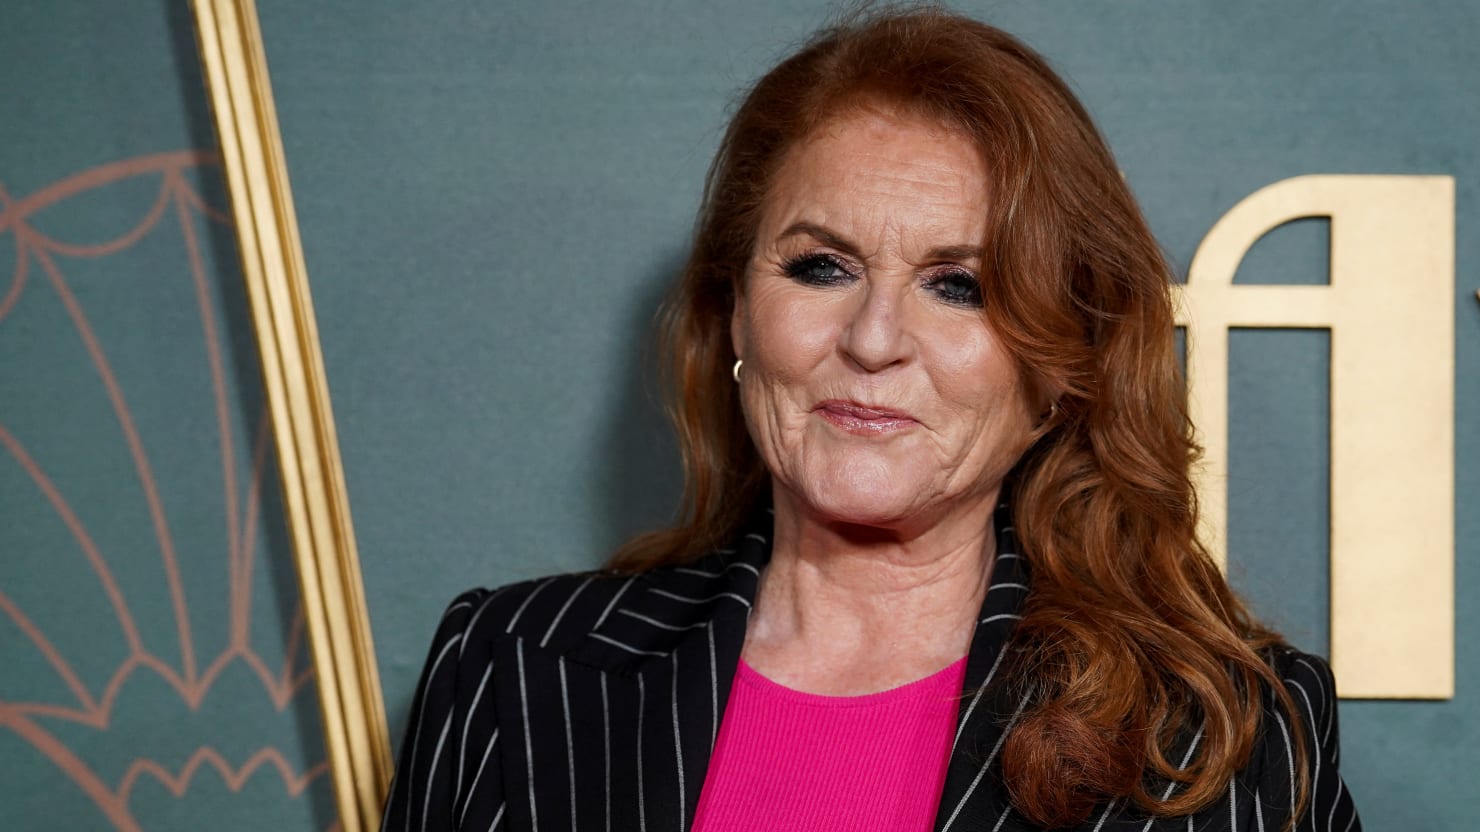 Sarah Ferguson Wants to Become a Chat Show Host: Report